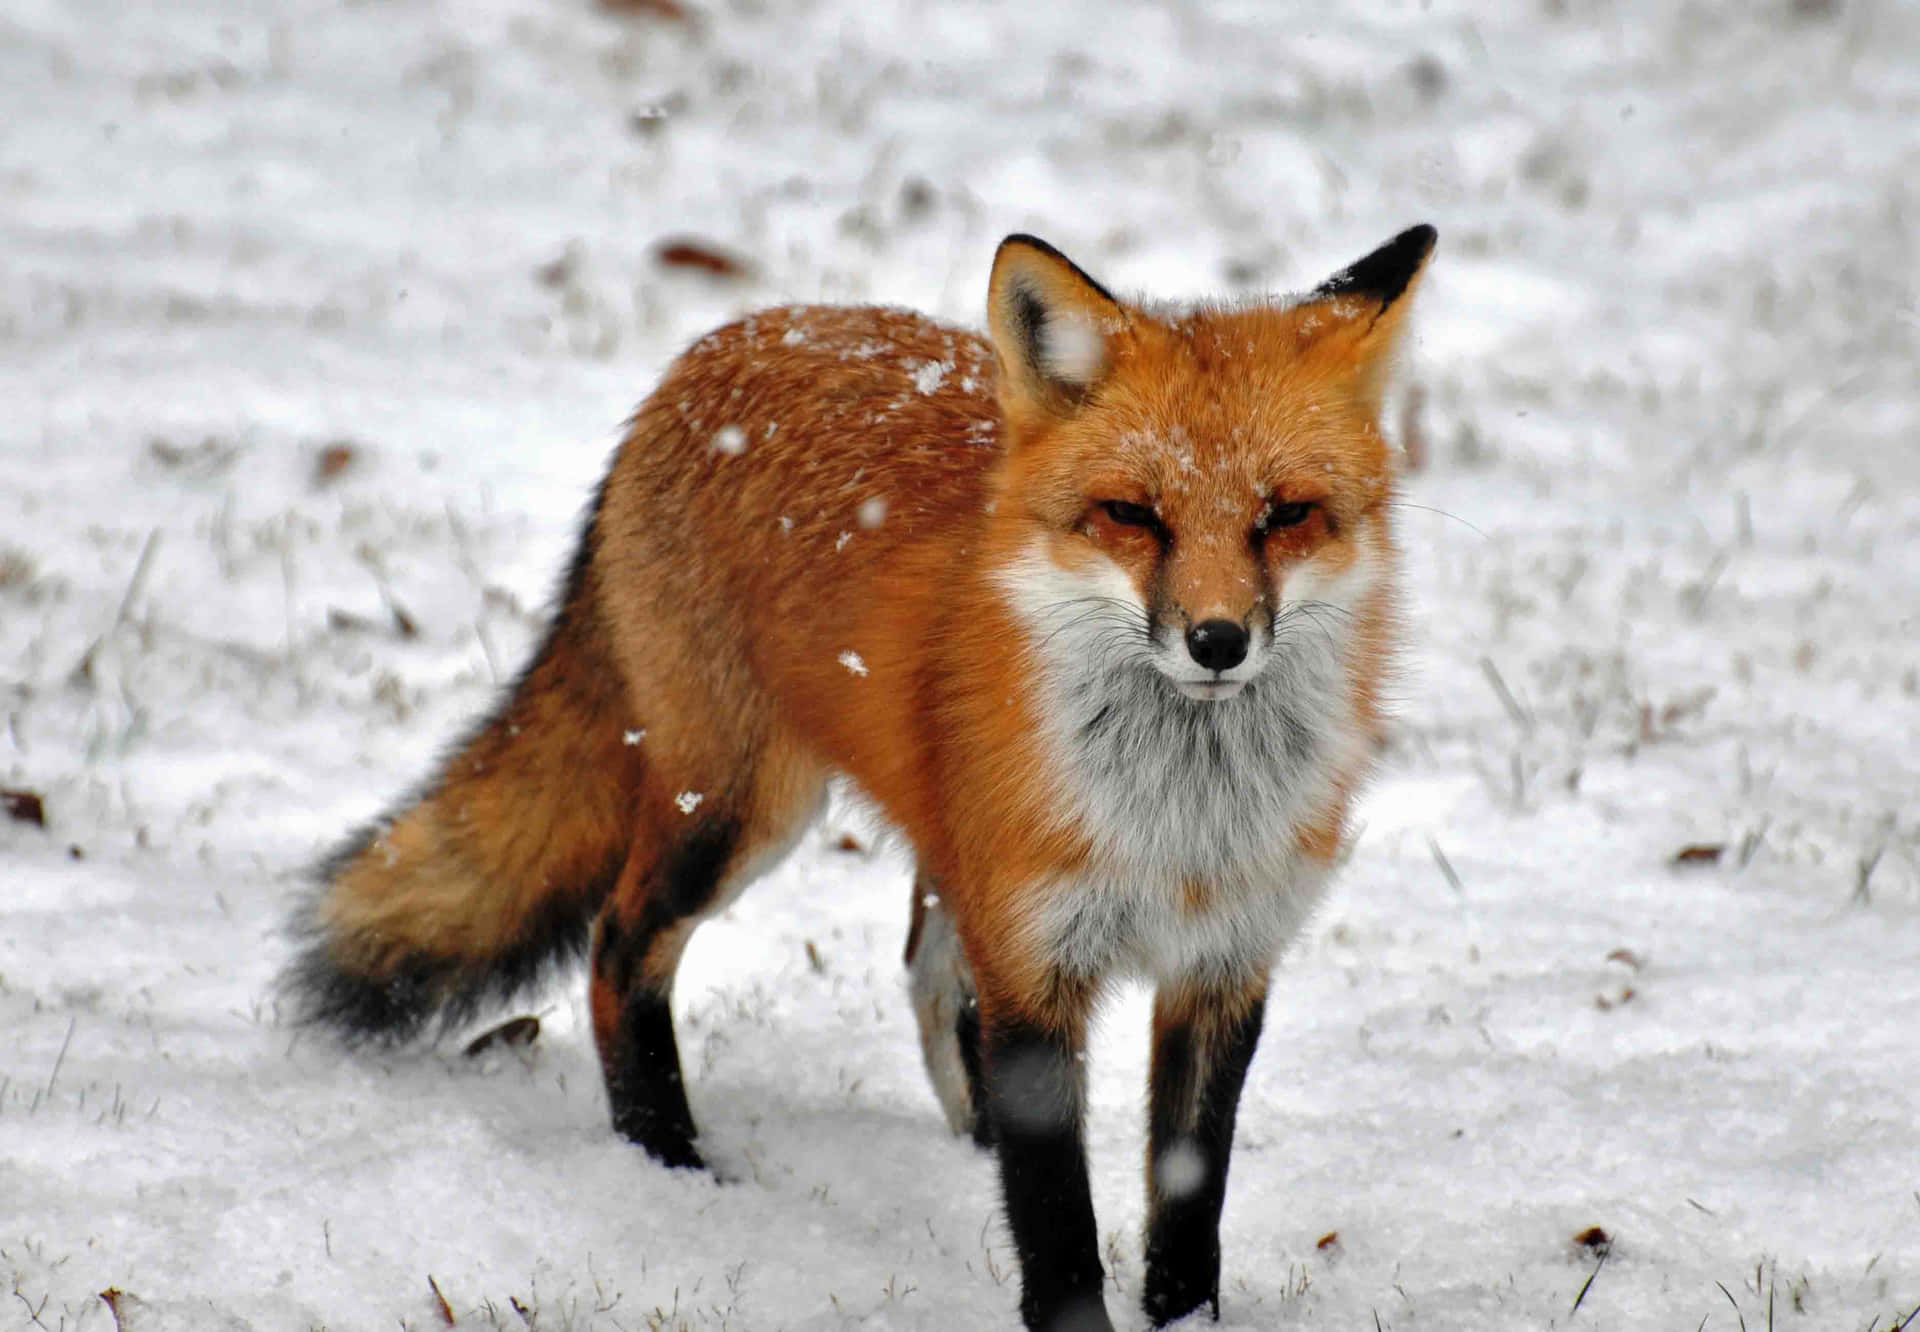 A beautiful red fox in its natural habitat.